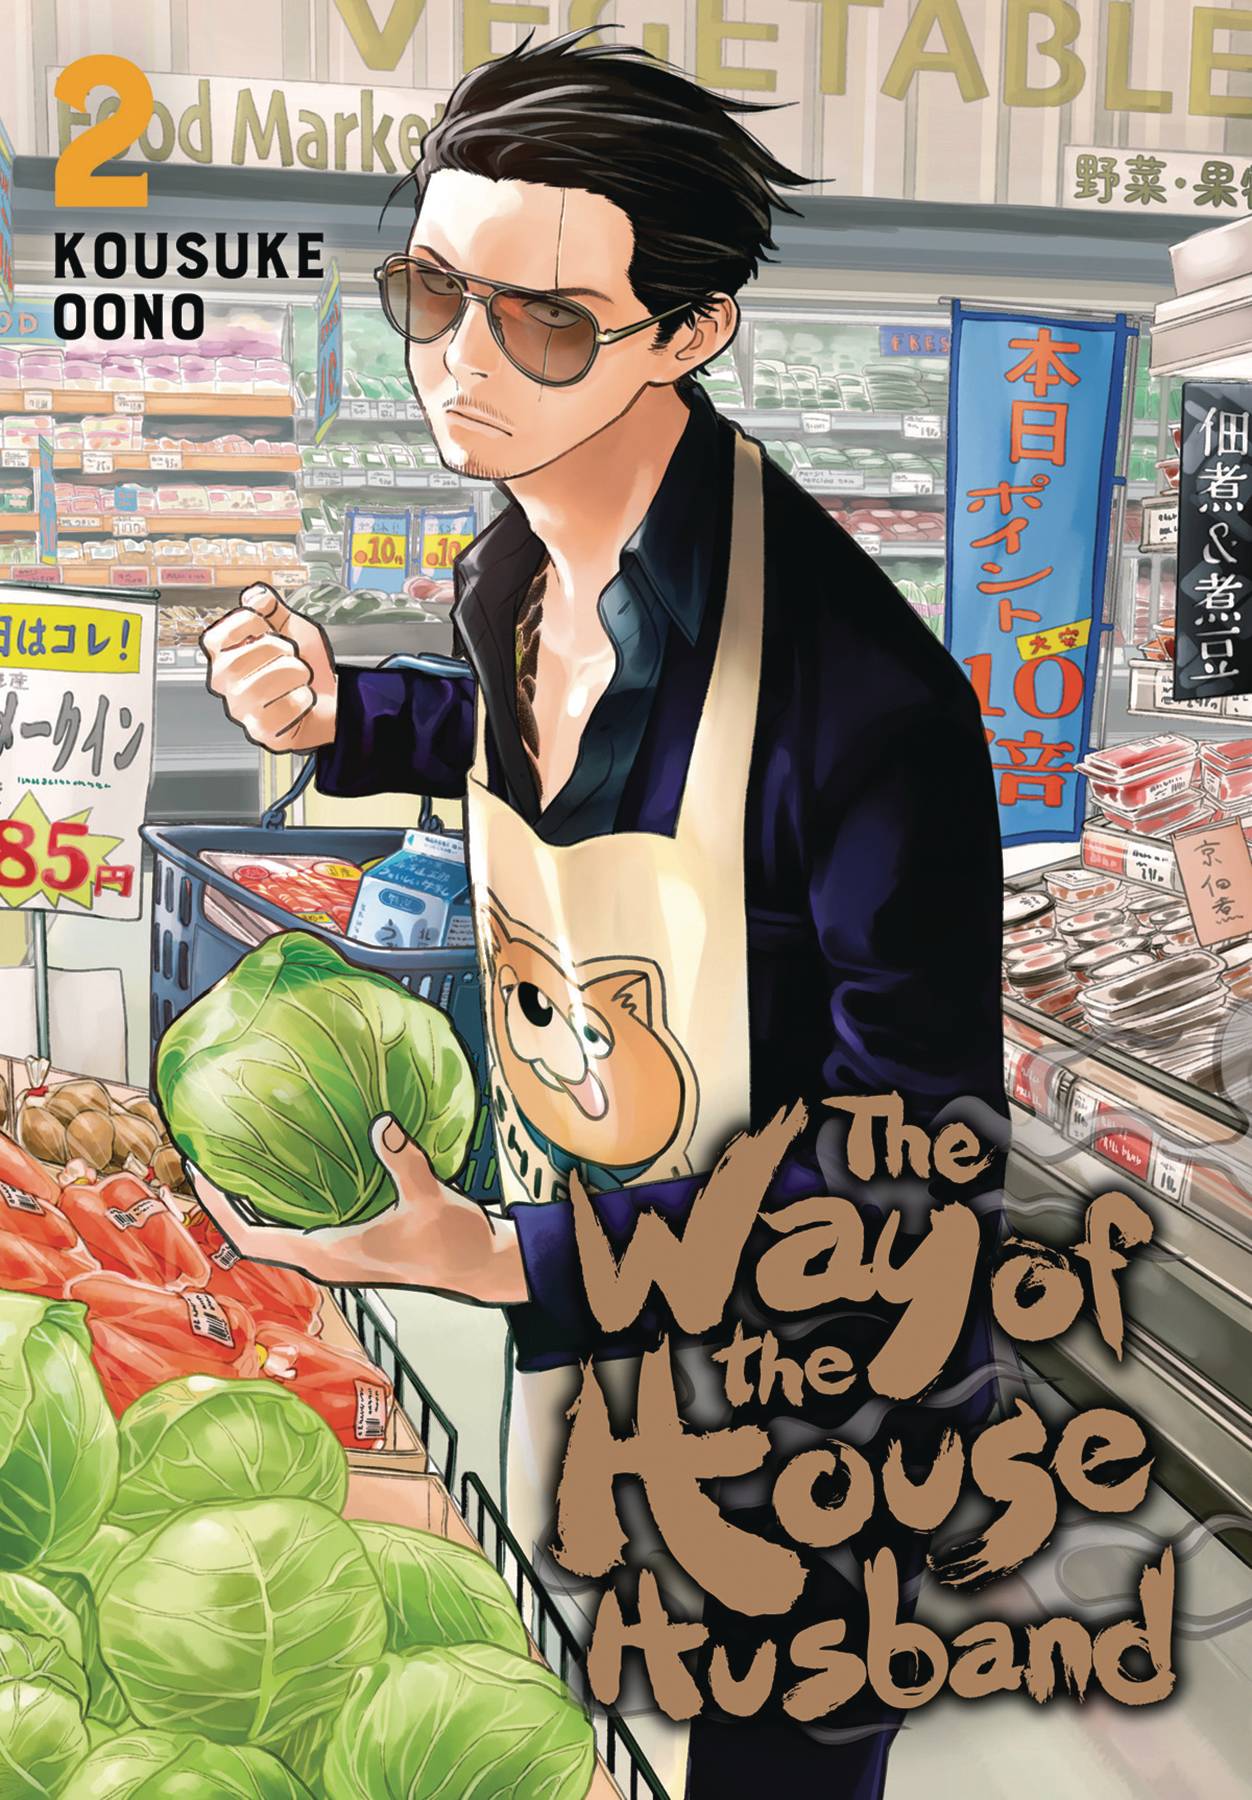 The Way Of The Househusband vol 2 s/c